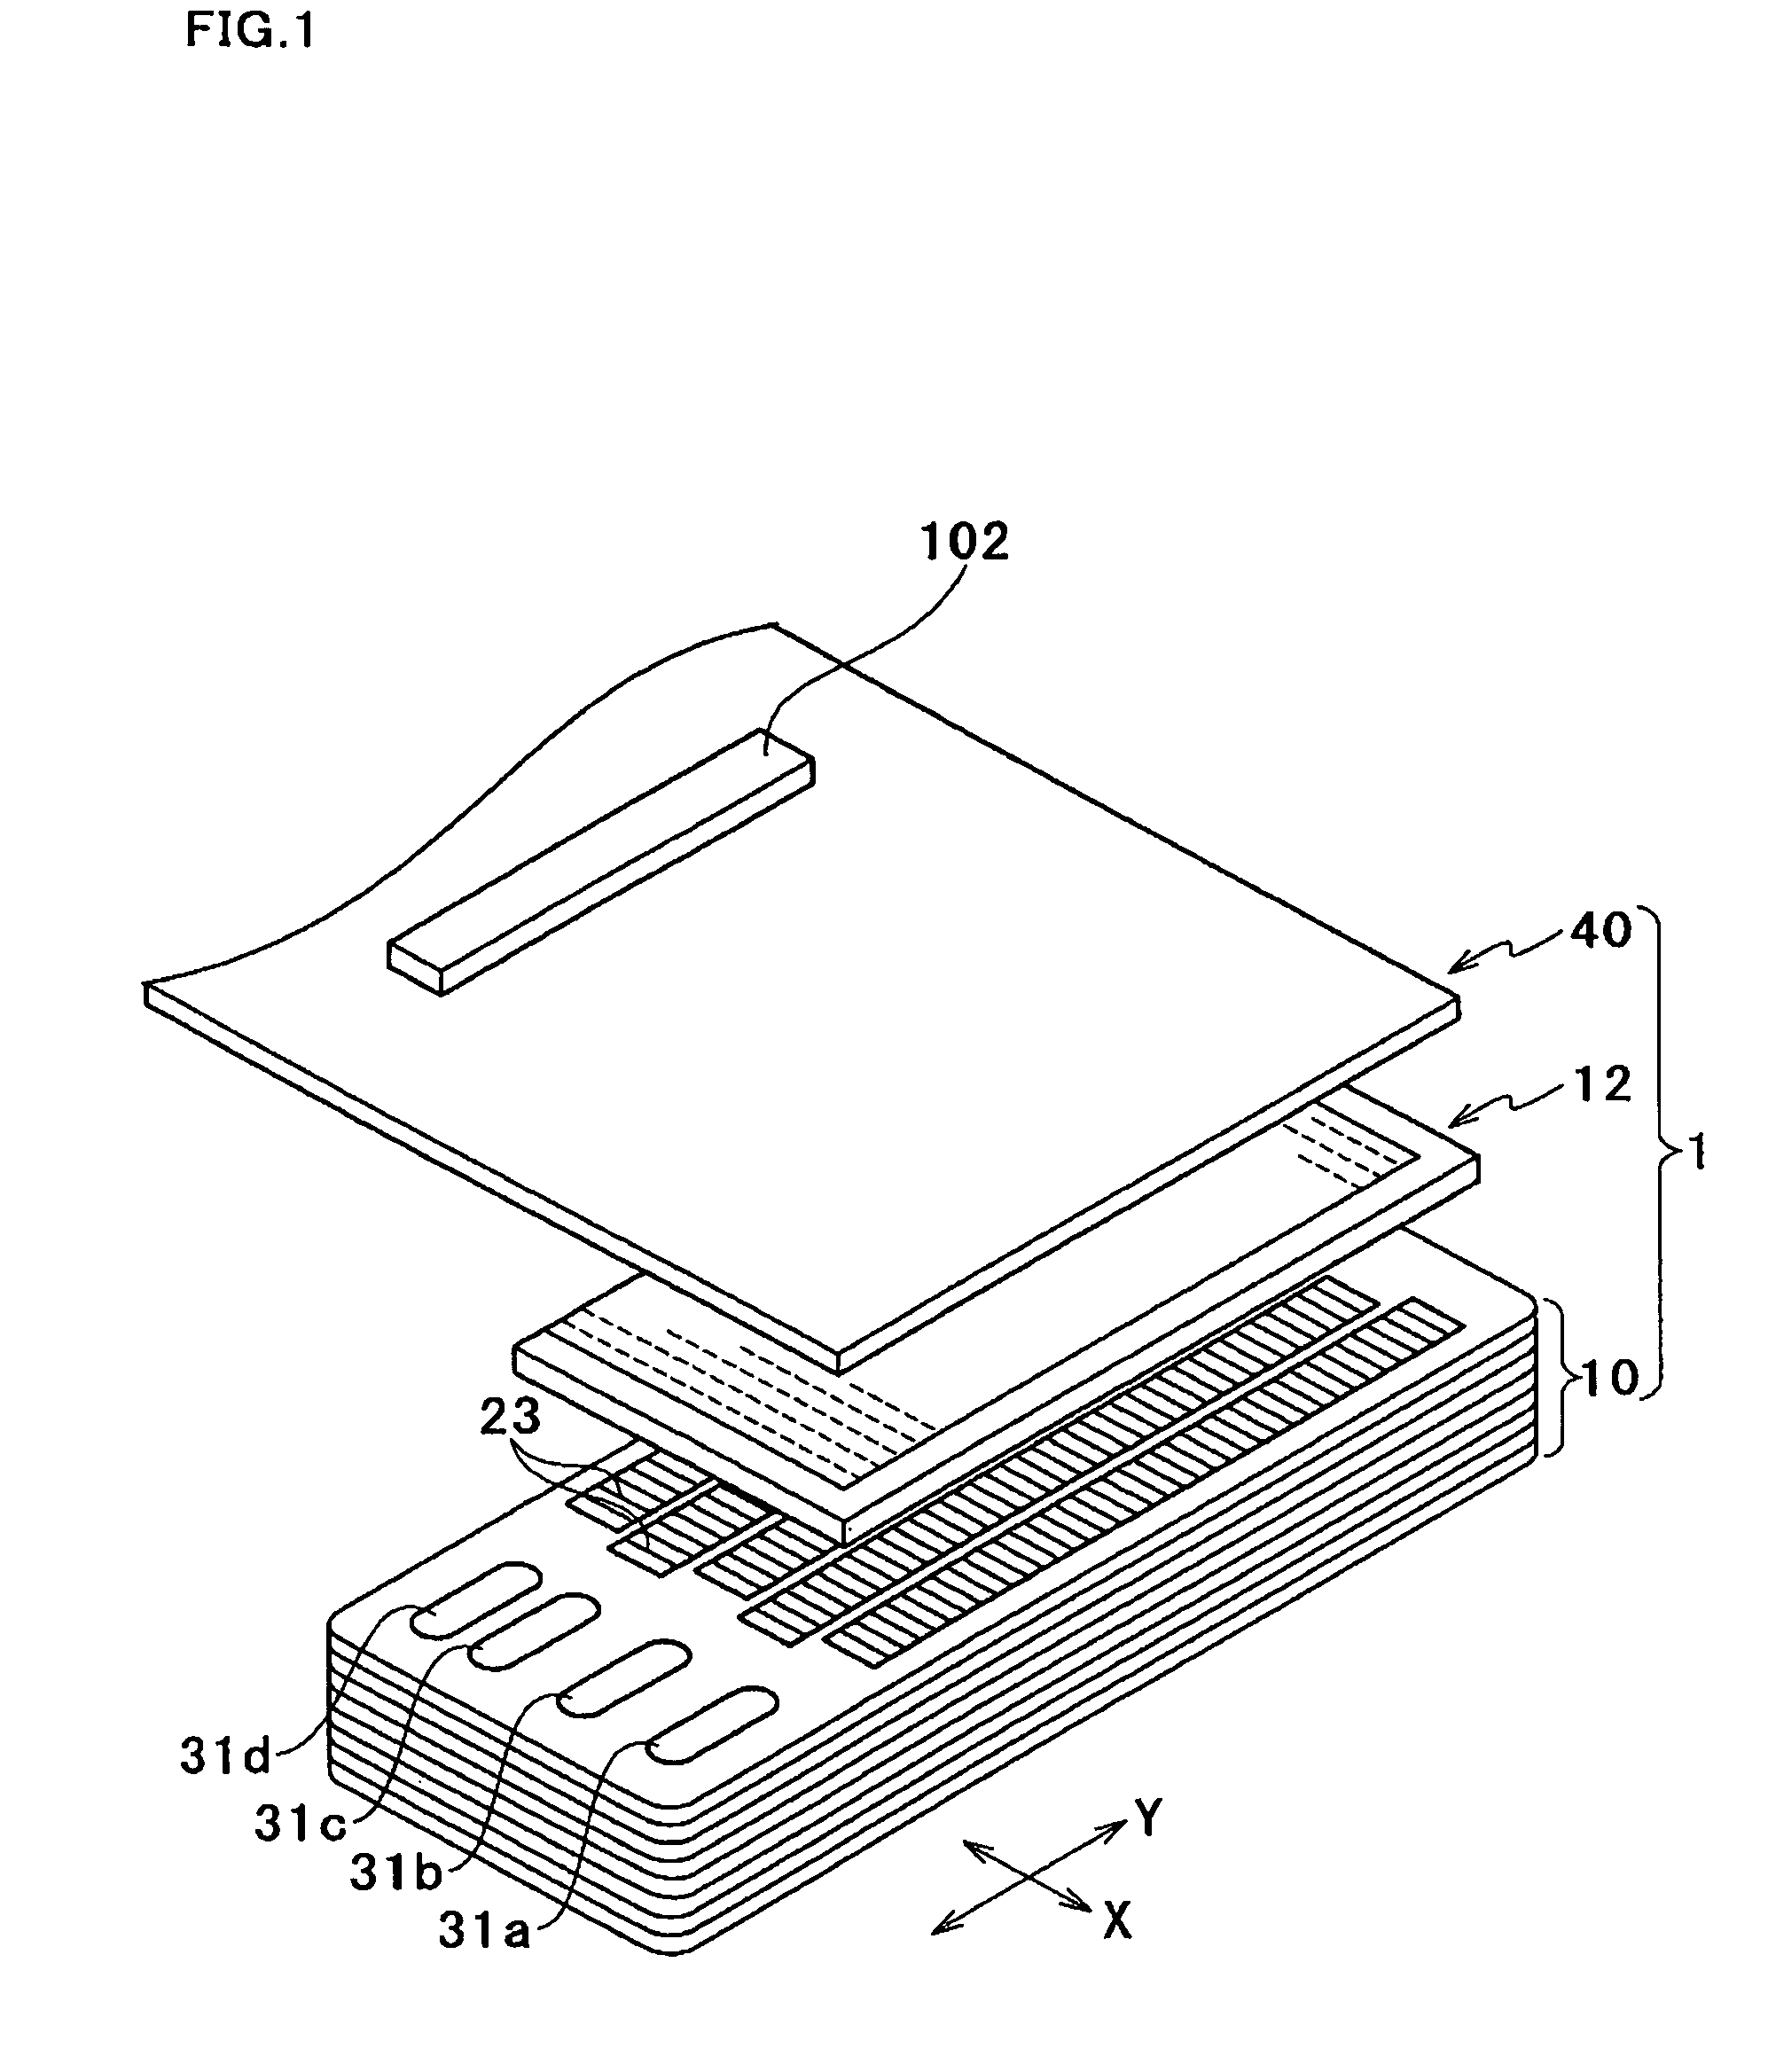 Method of manufacturing an ink-jet assembly